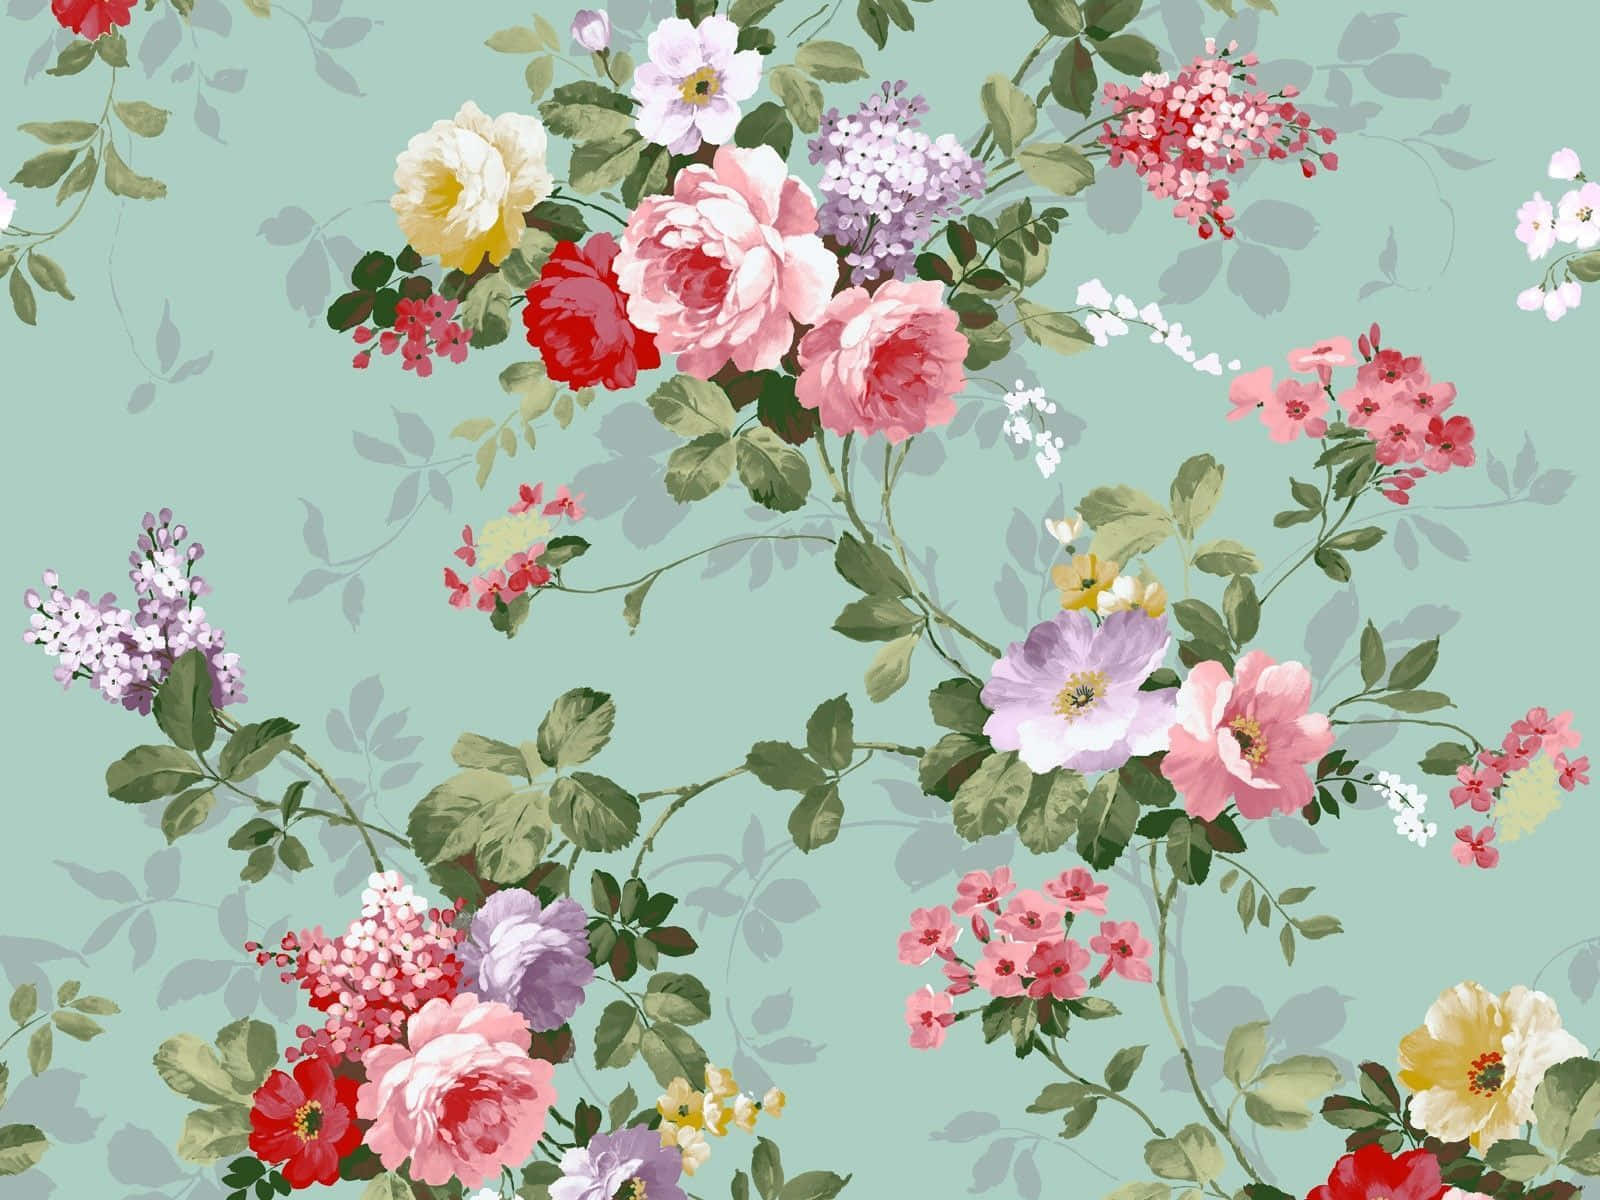 Show off your creative side with Floral Computer Wallpaper